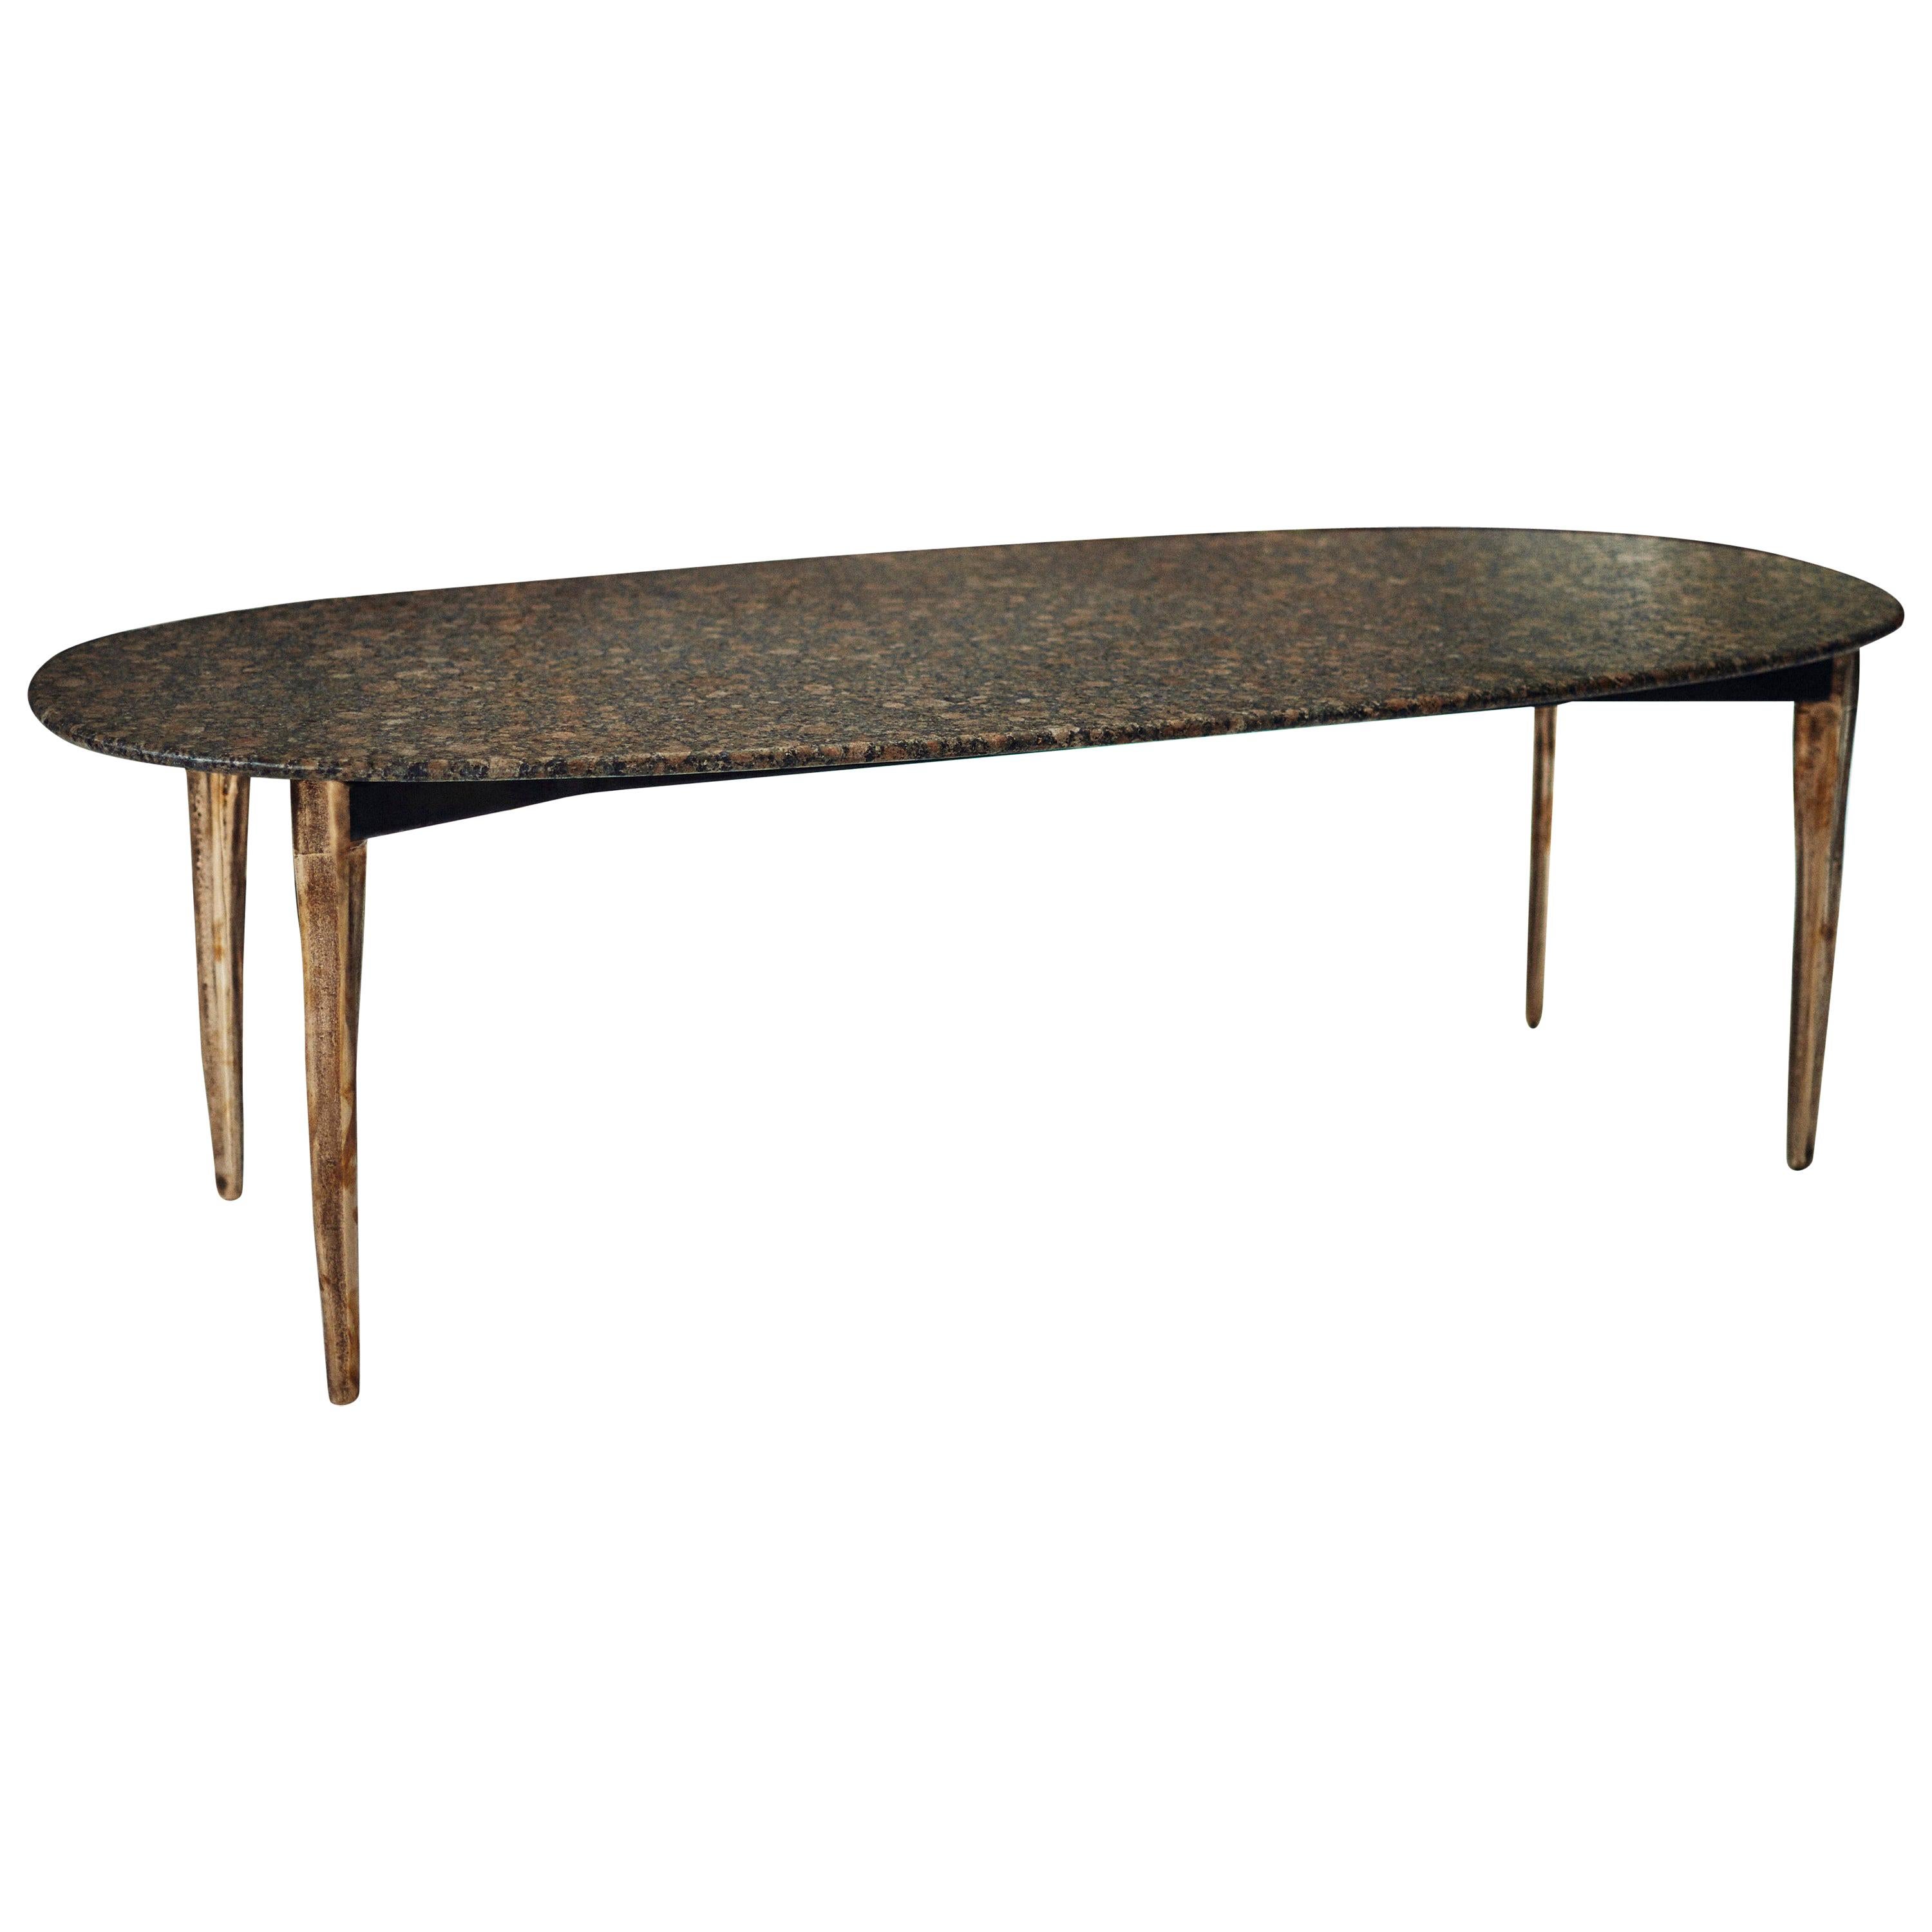 Barbera 'OSSO' Oval Dining Table, Modern Solid Bronze Base with Stone Top For Sale